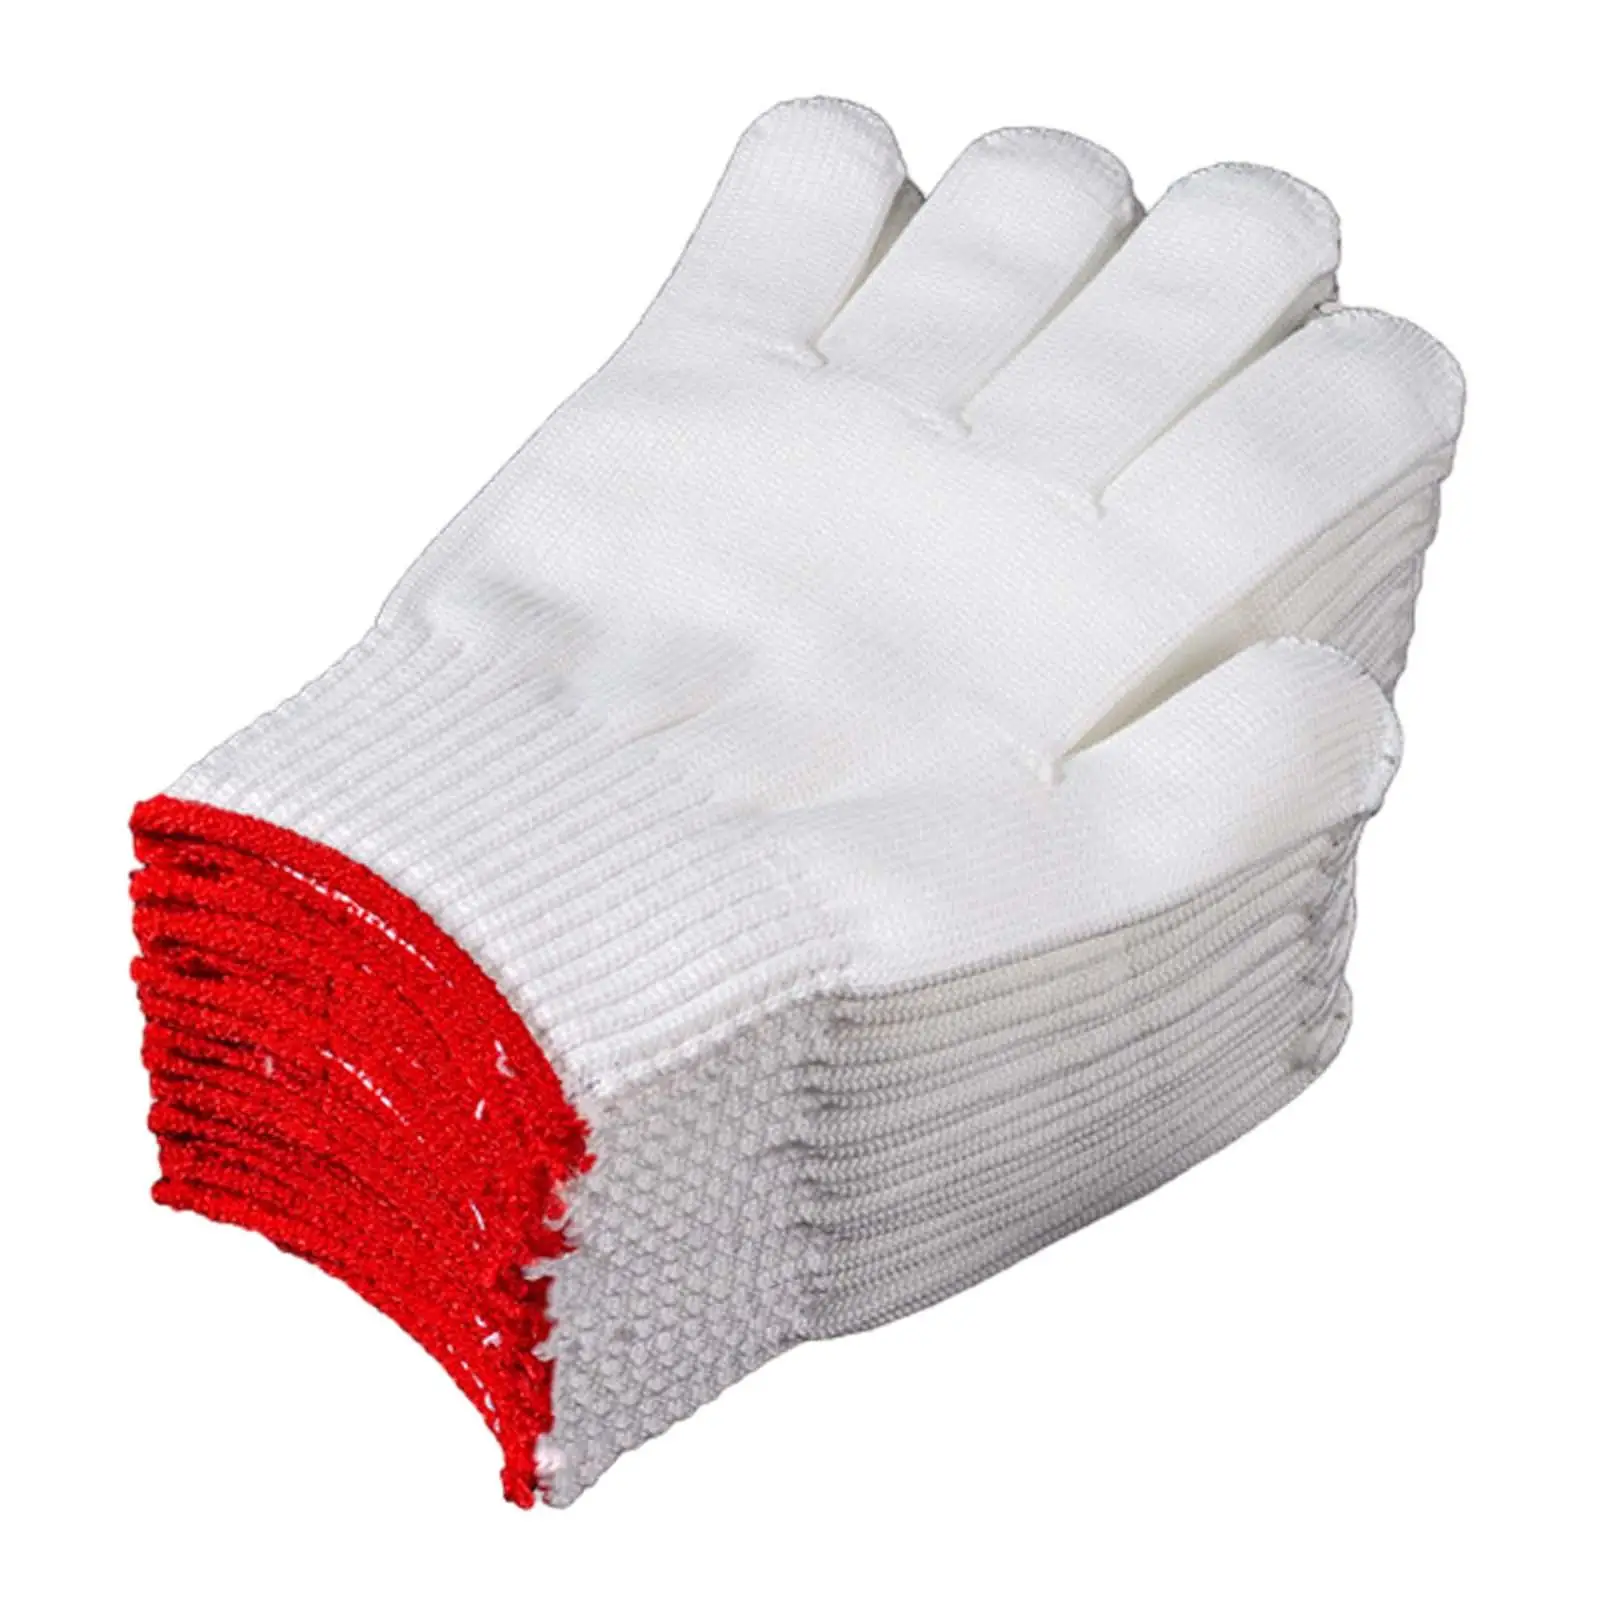 12 Pairs Cotton Work Gloves Cotton Labor Protection Gloves for Construction Fishing Gardening Winter Indoor Outdoor Use Utility